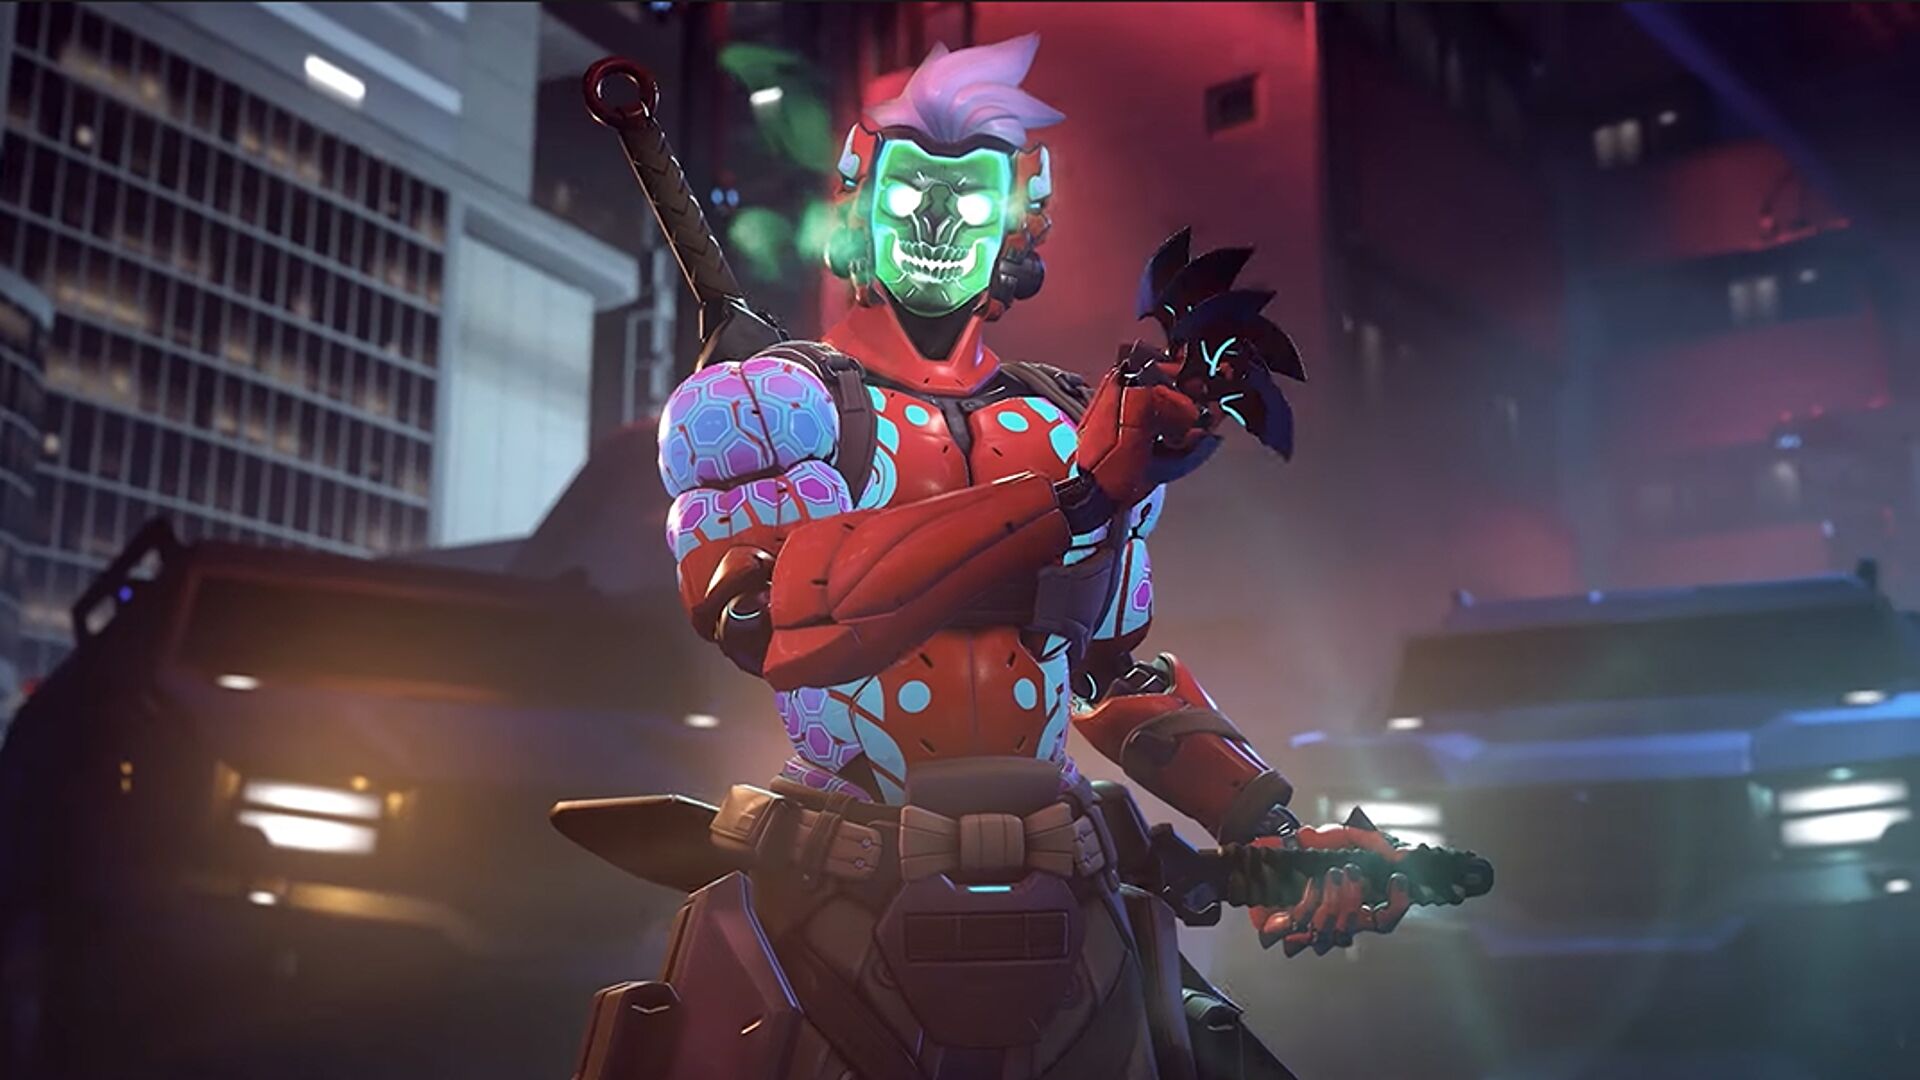 Blizzard are “interested in exploring” Fortnite-style crossovers for Overwatch 2